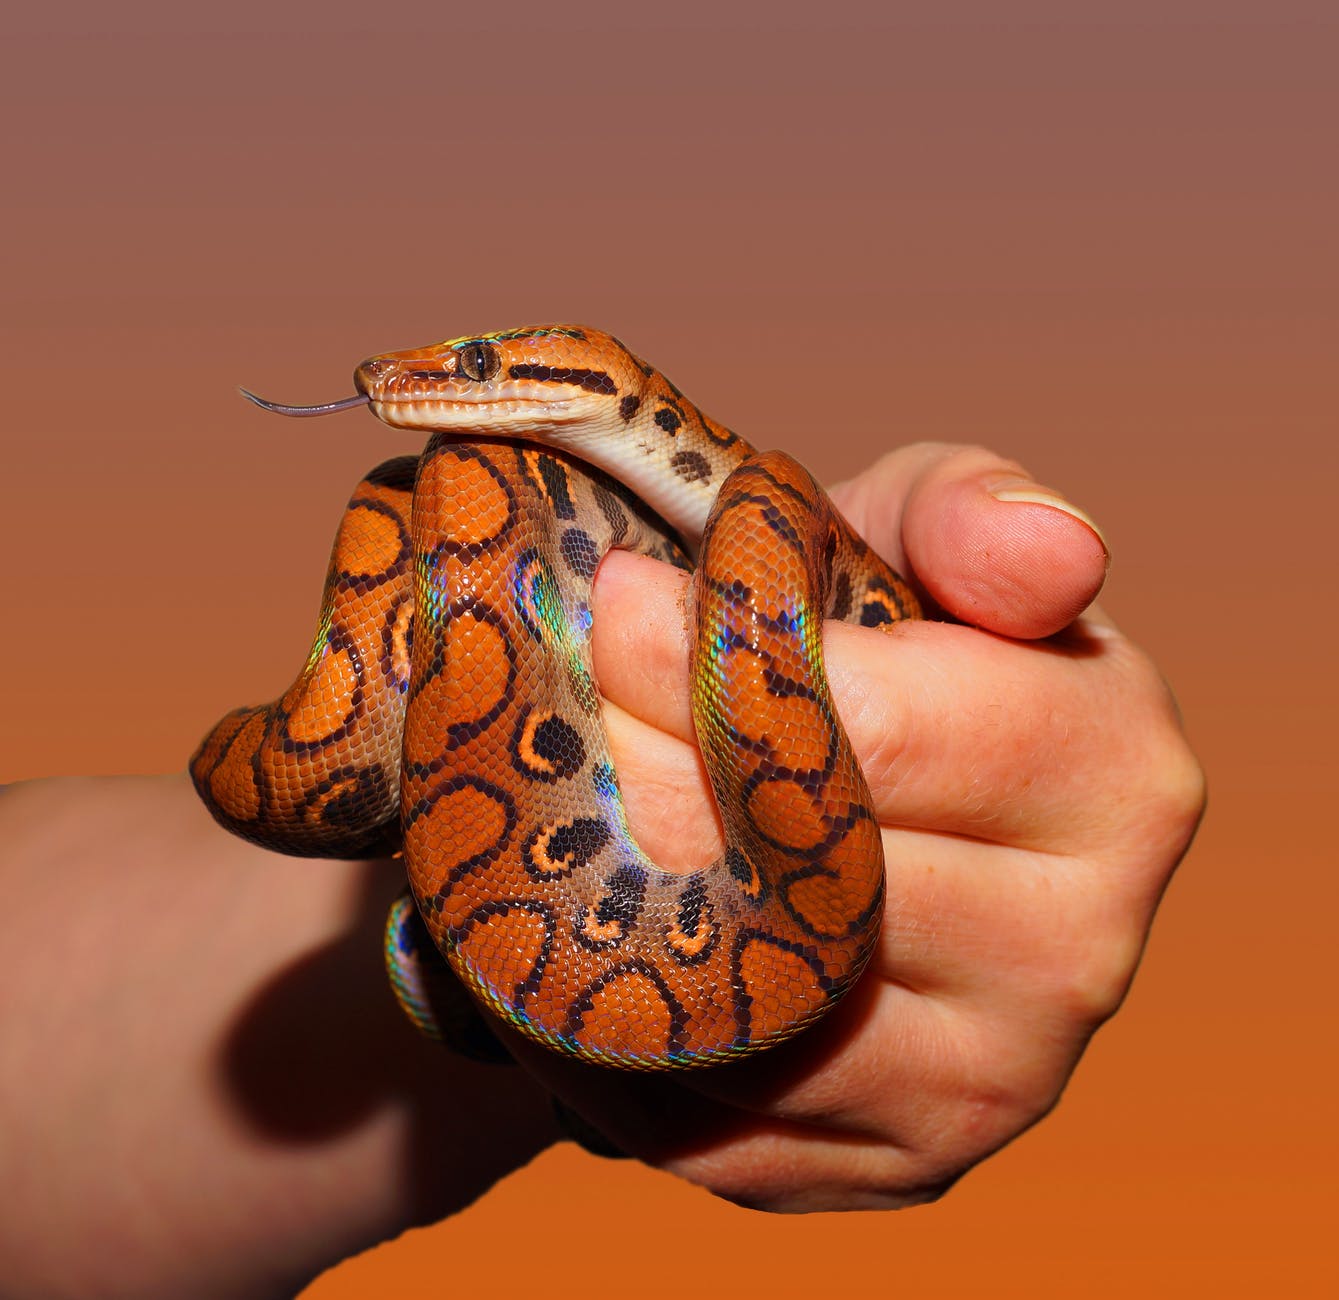 person holding red and black snake